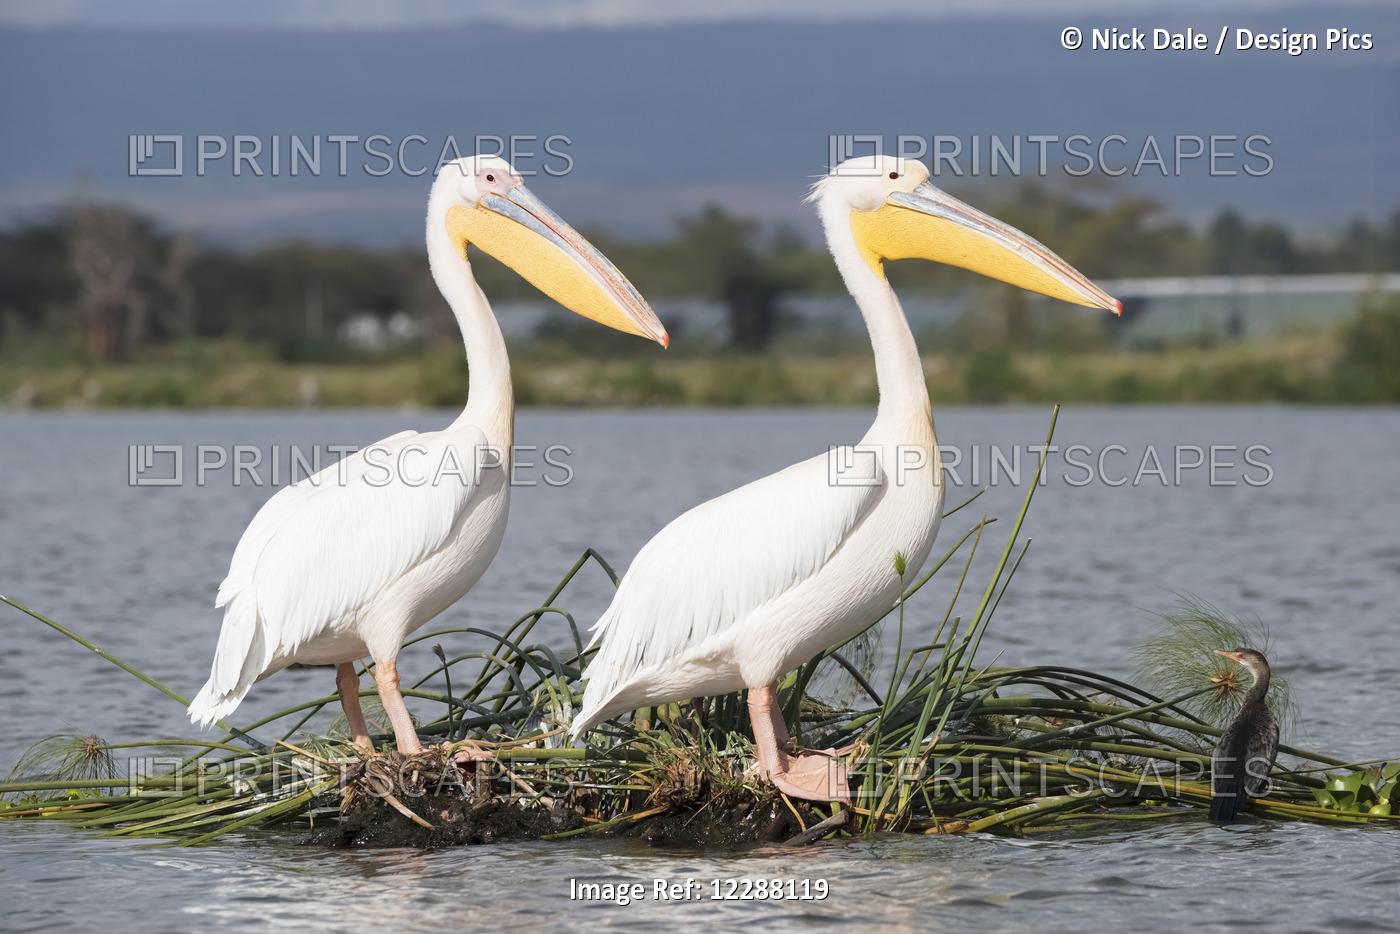 Two Pelicans With Yellow Bills, White Feathers And Pink Legs Are Perched On A ...